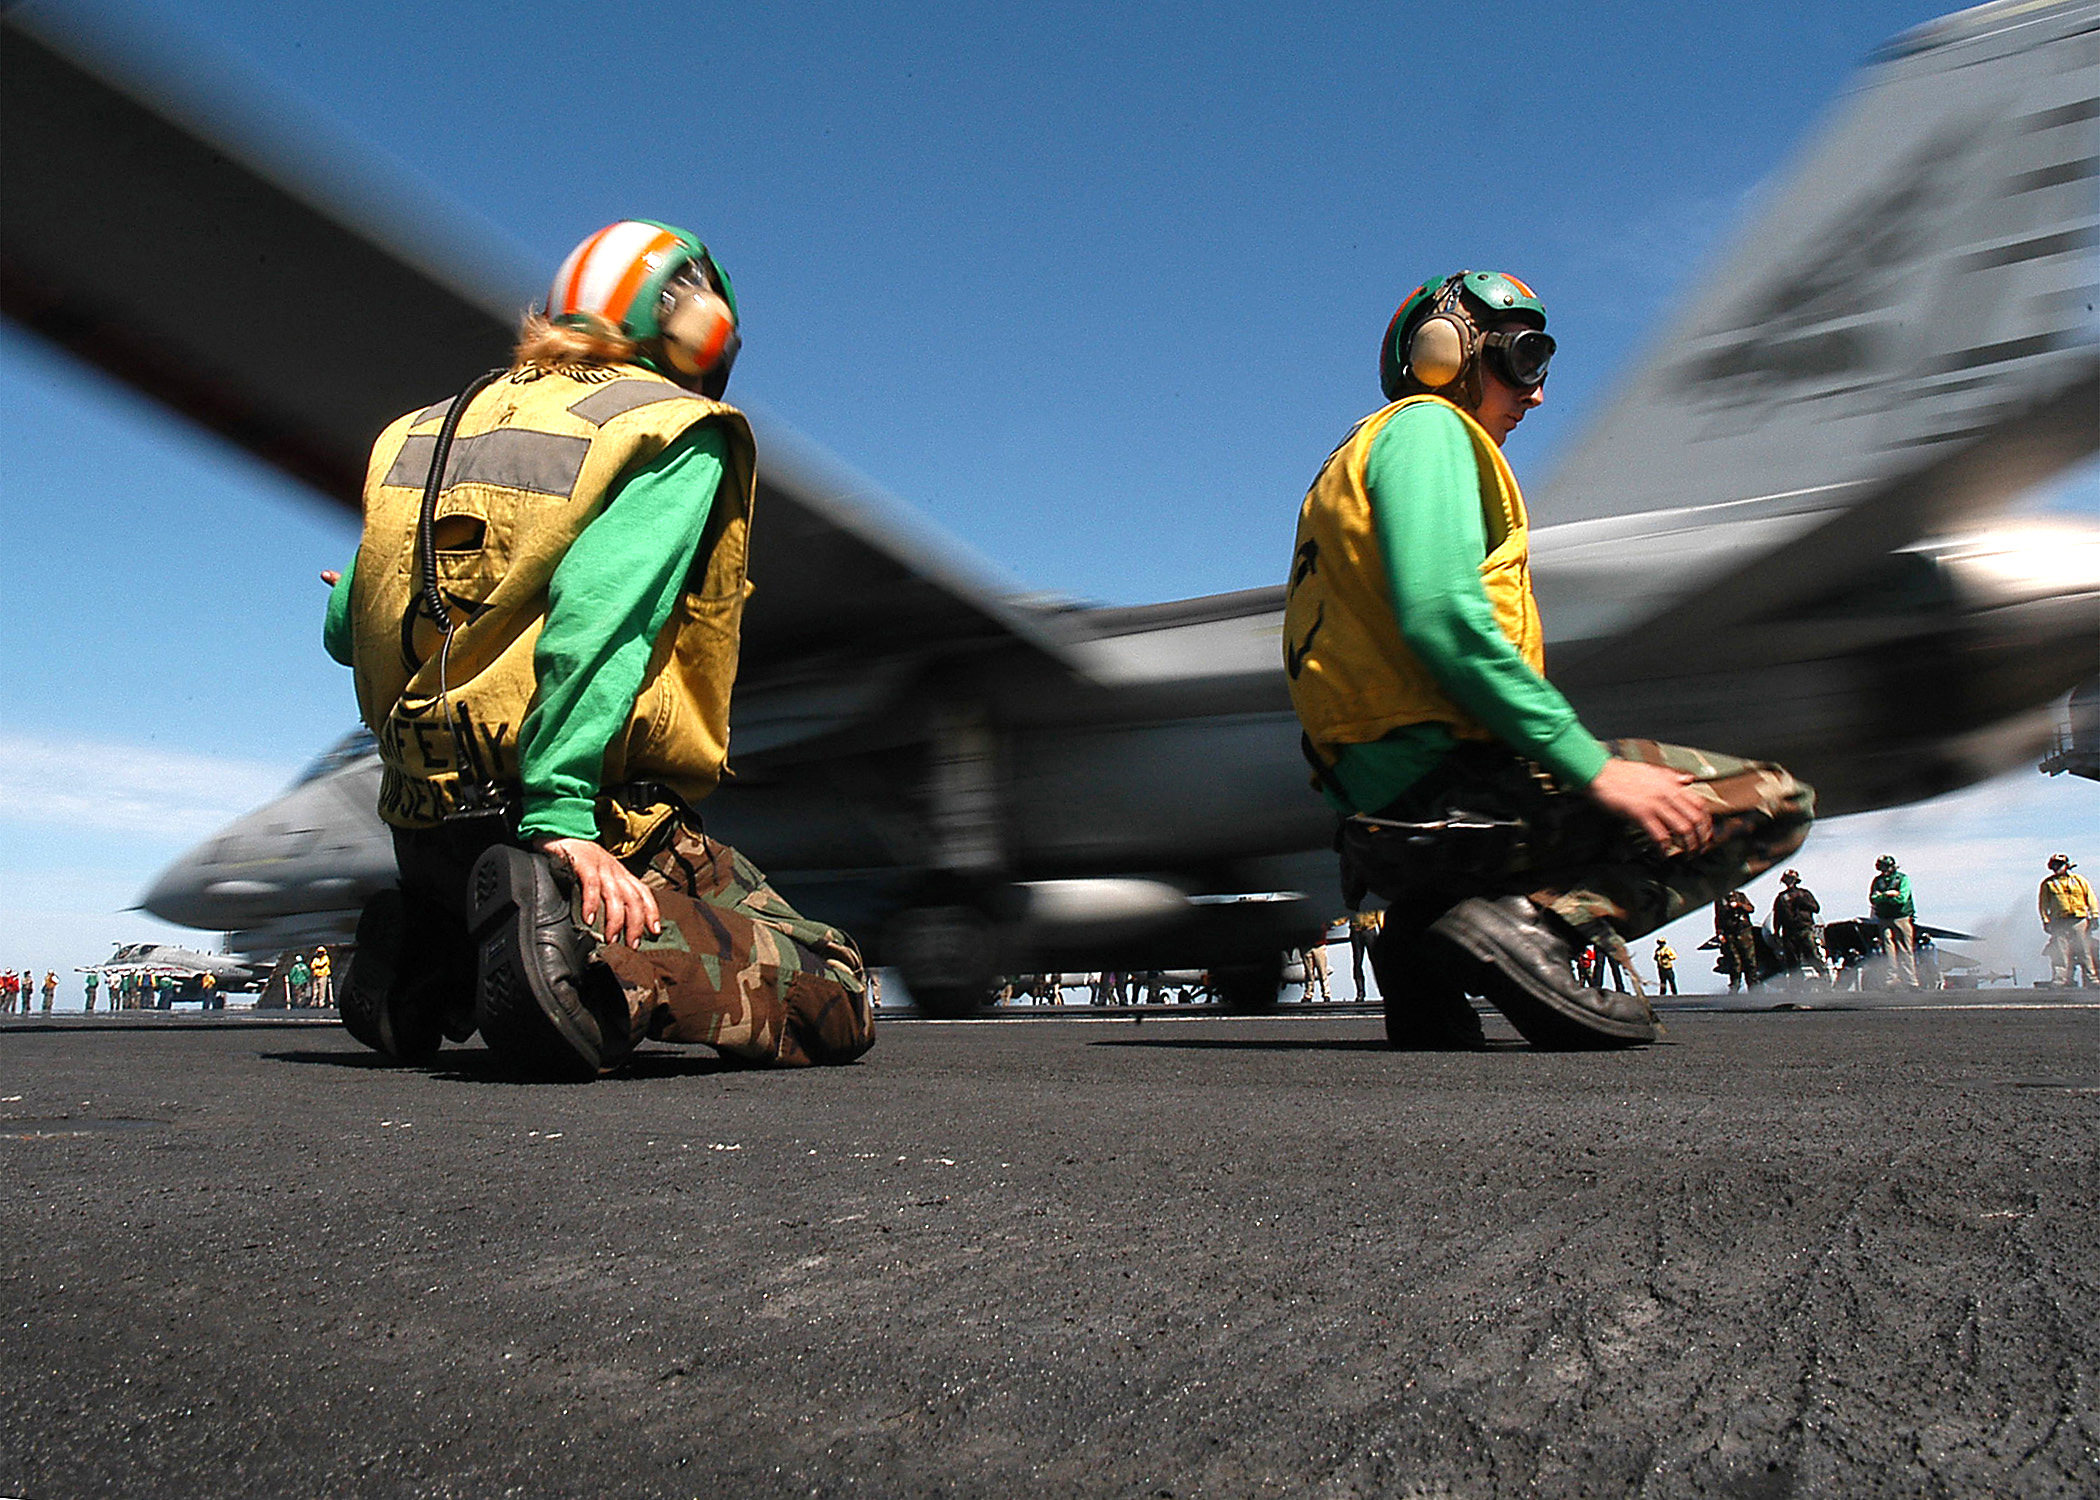 US Navy 040217-N-3986D-020 Flight deck catapult crew members work the ship^rsquo,s flight deck as an F-14B Tomcat s launched from the flight deck